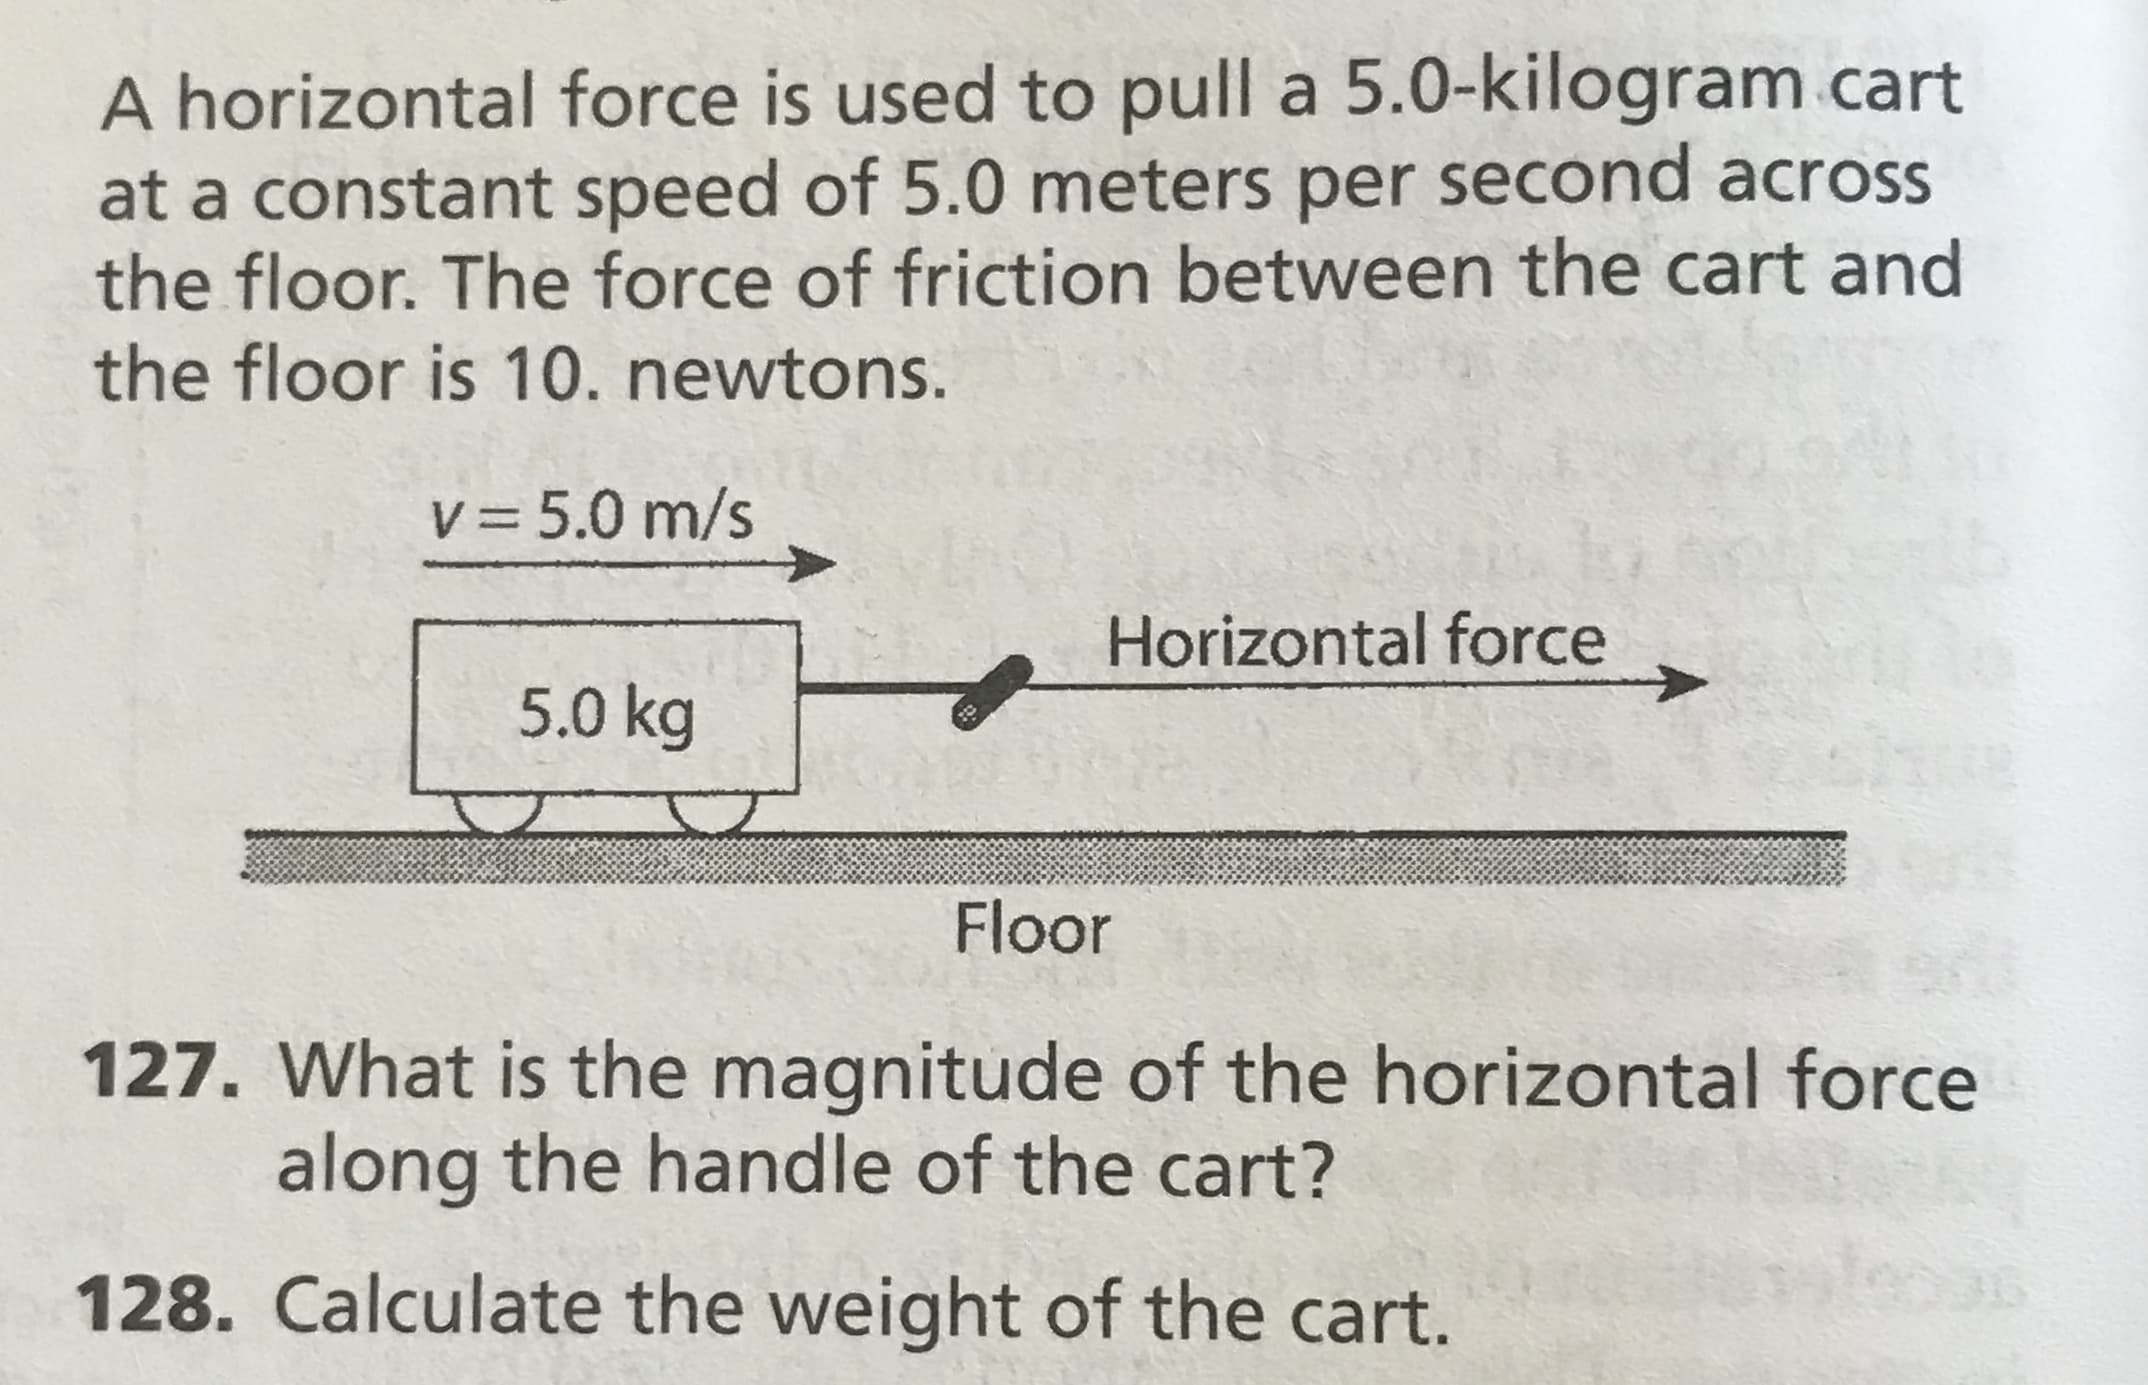 A horizontal force is used to pull a 5.0-kilogram cart
at a constant speed of 5.0 meters per second across
the floor. The force of friction between the cart and
the floor is 10. newtons.
V 5.0 m/s
Horizontal force
5.0 kg
Floor
127. What is the magnitude of the horizontal force
along the handle of the cart?
128. Calculate the weight of the cart.
